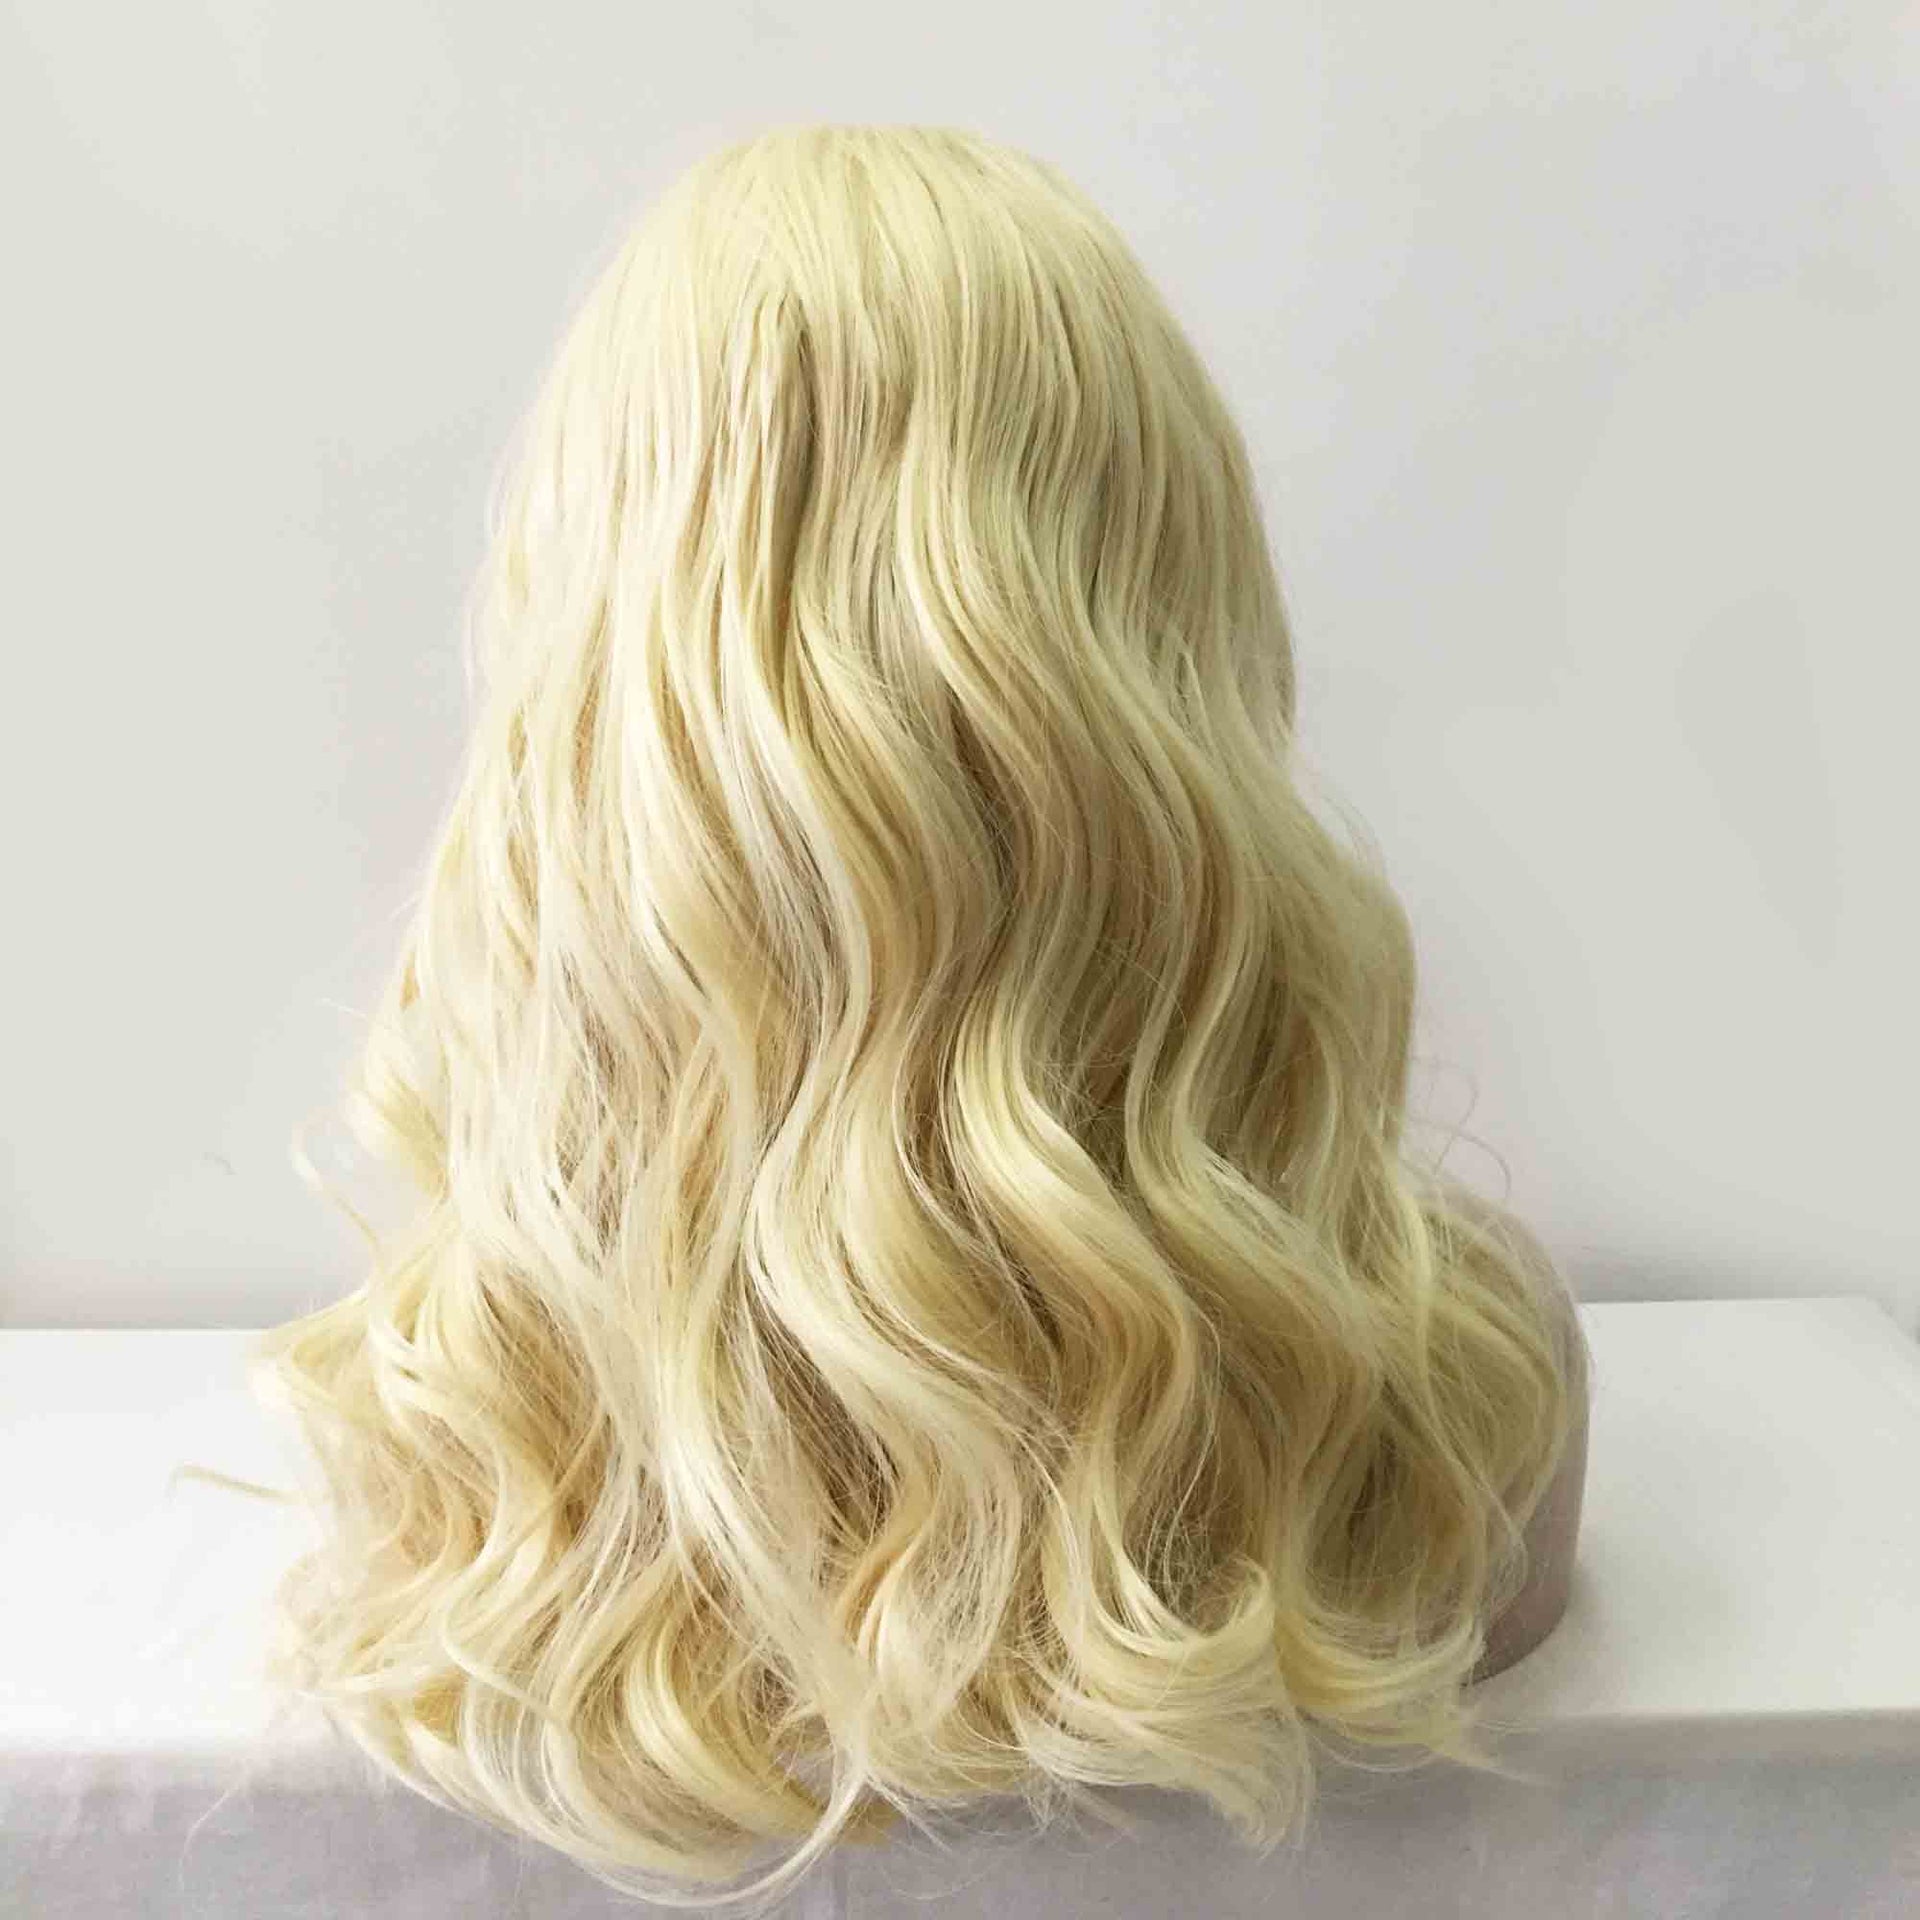 nevermindyrhead Women Creamy Blonde Lace Front Side Part Curly Wavy Long Hair Wig